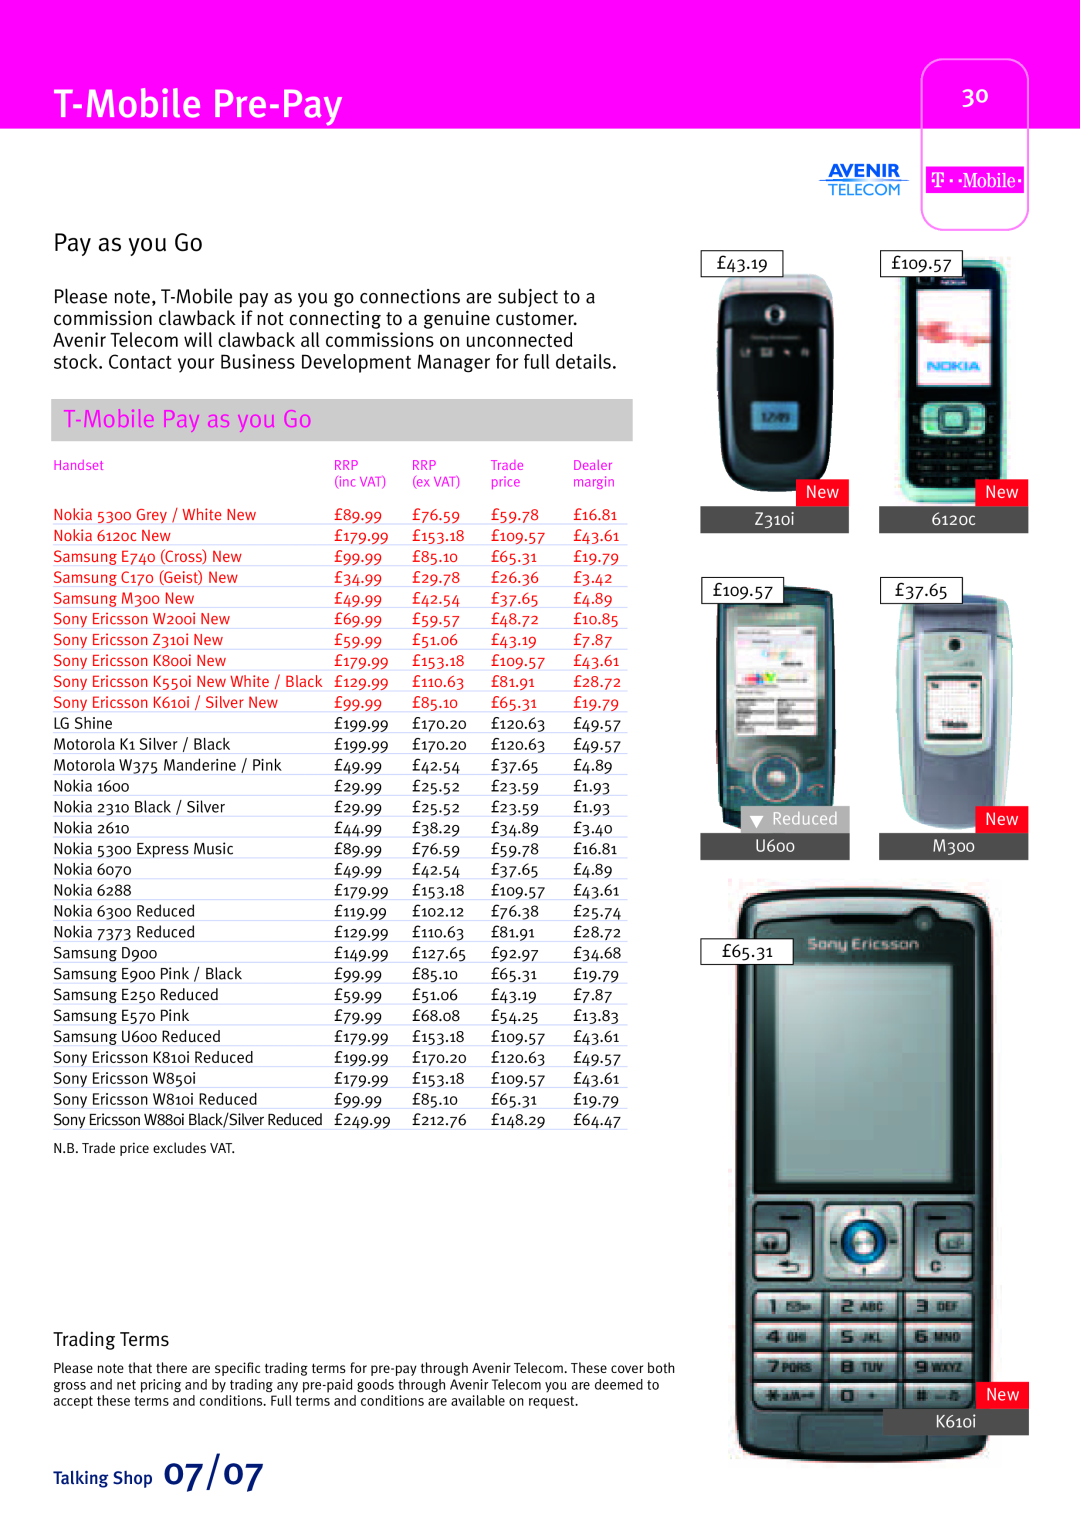 Sony Ericsson W580i T-Mobile Pre-Pay, T-Mobile Pay as you Go, Trading Terms, Talking Shop 07/07, New Z310i, Reduced 